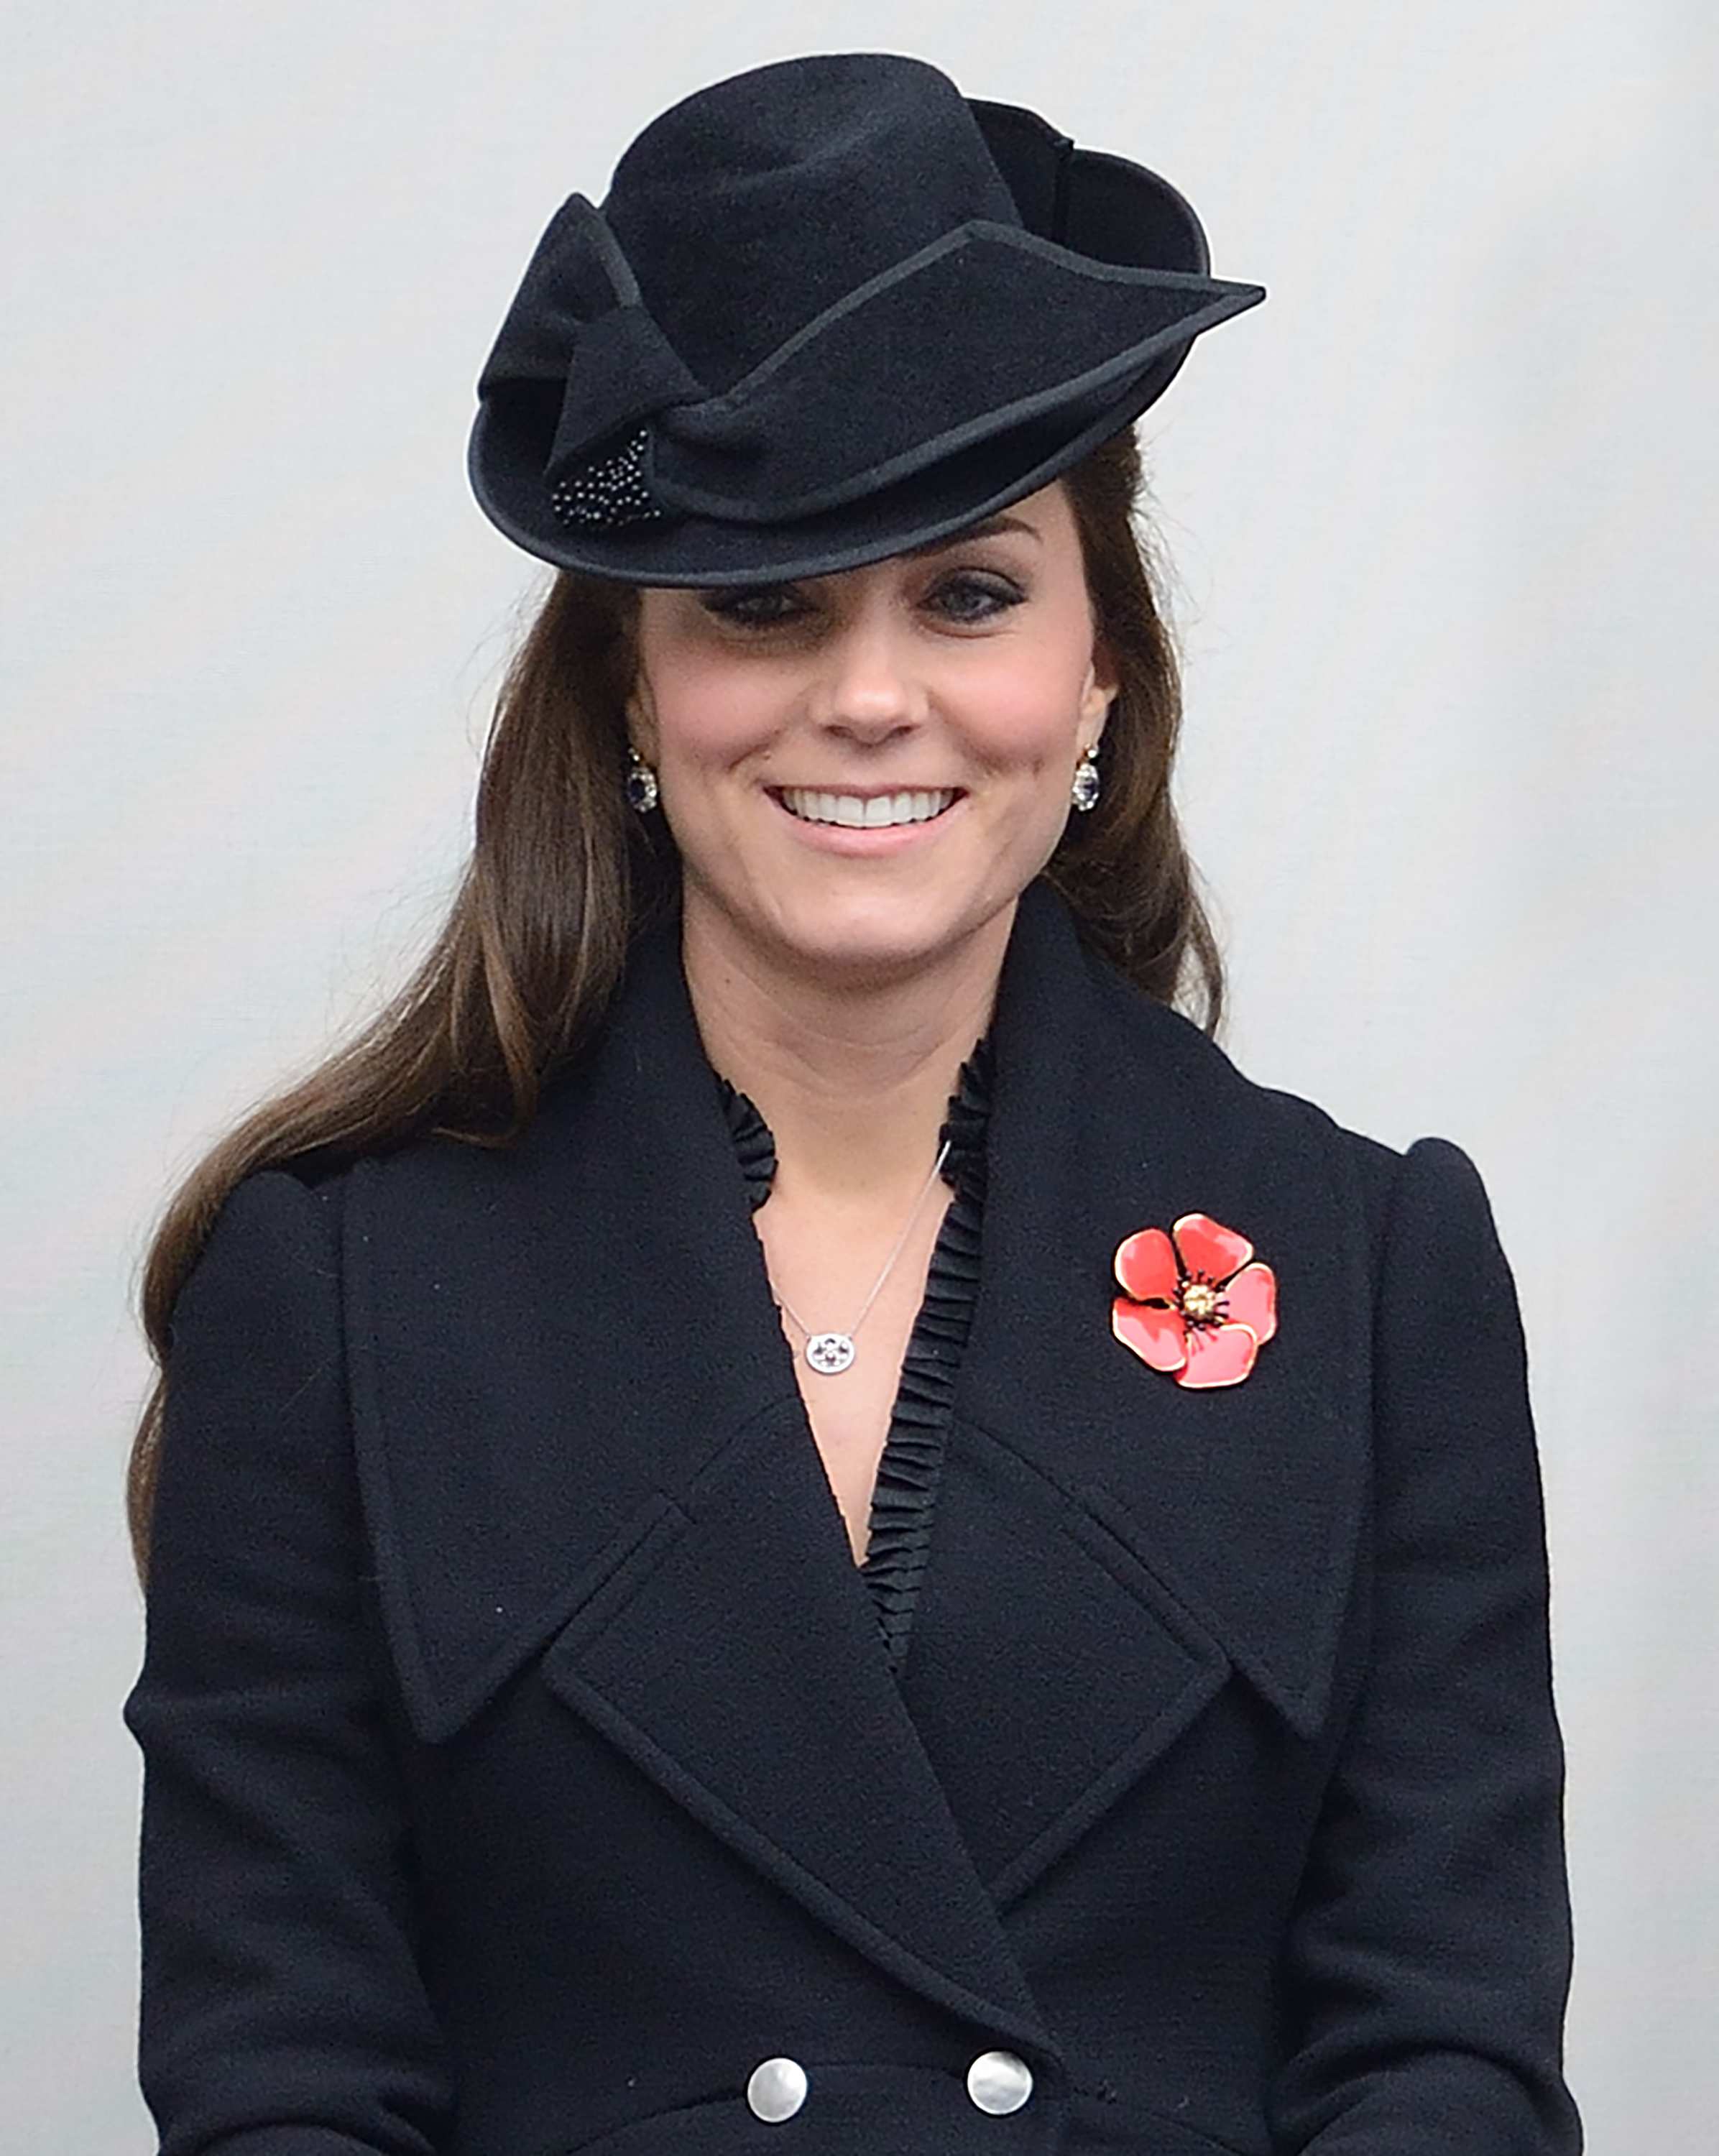 Catherine, Duchess of Cambridge attends The Remembrance Sunday Service at The Cenotaph, London on Nov. 9, 2014.